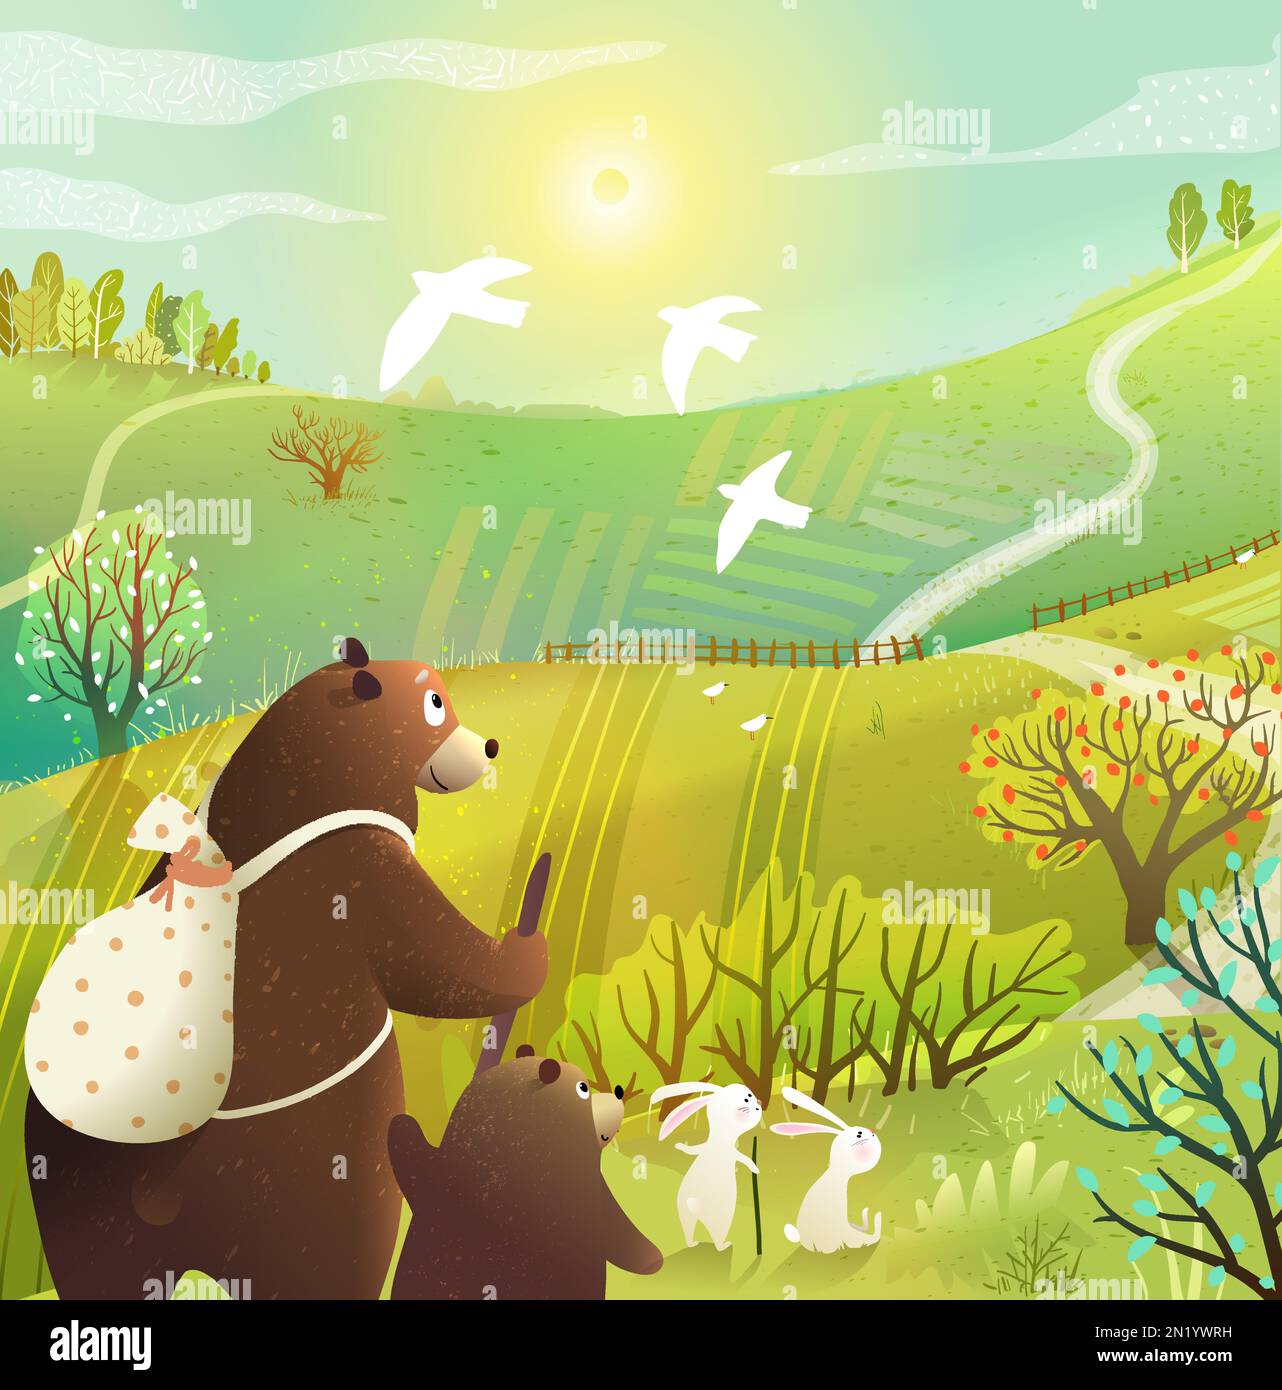 Bears Travelling in Rustic Wild Scenery Landscape Stock Vector